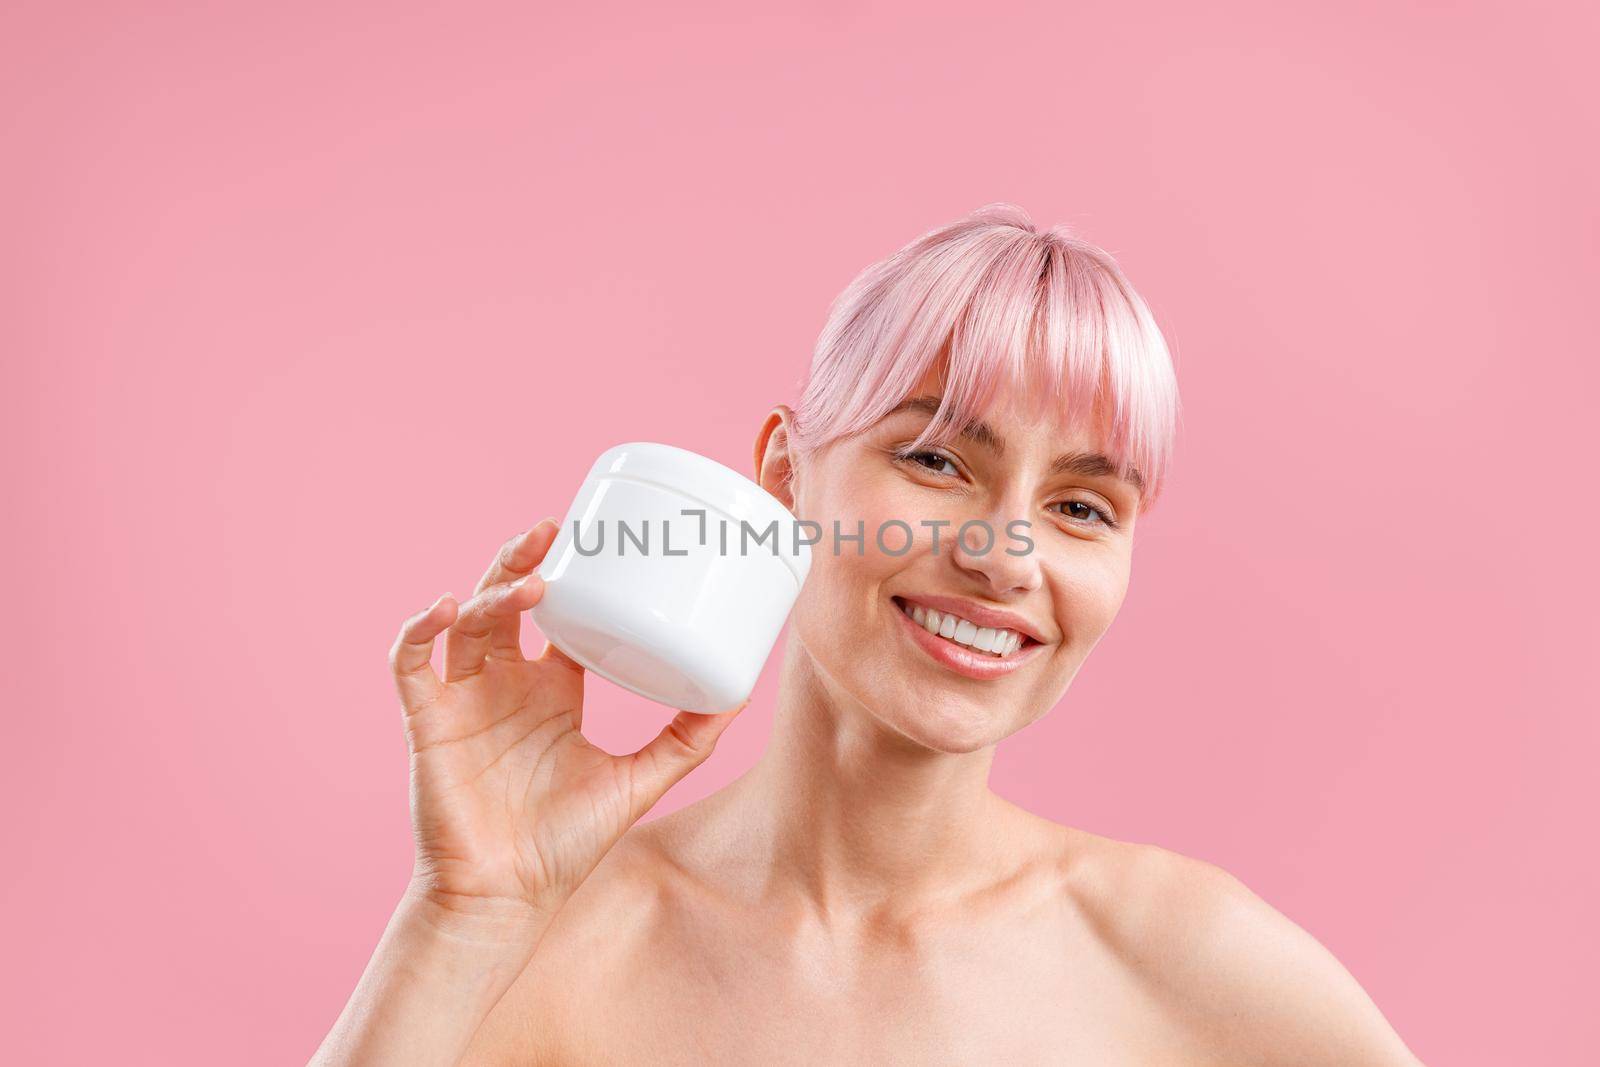 Portrait of smiling woman with pink hair holding white jar with moisturizing body lotion after shower isolated over pink background. Beauty, spa, body care concept